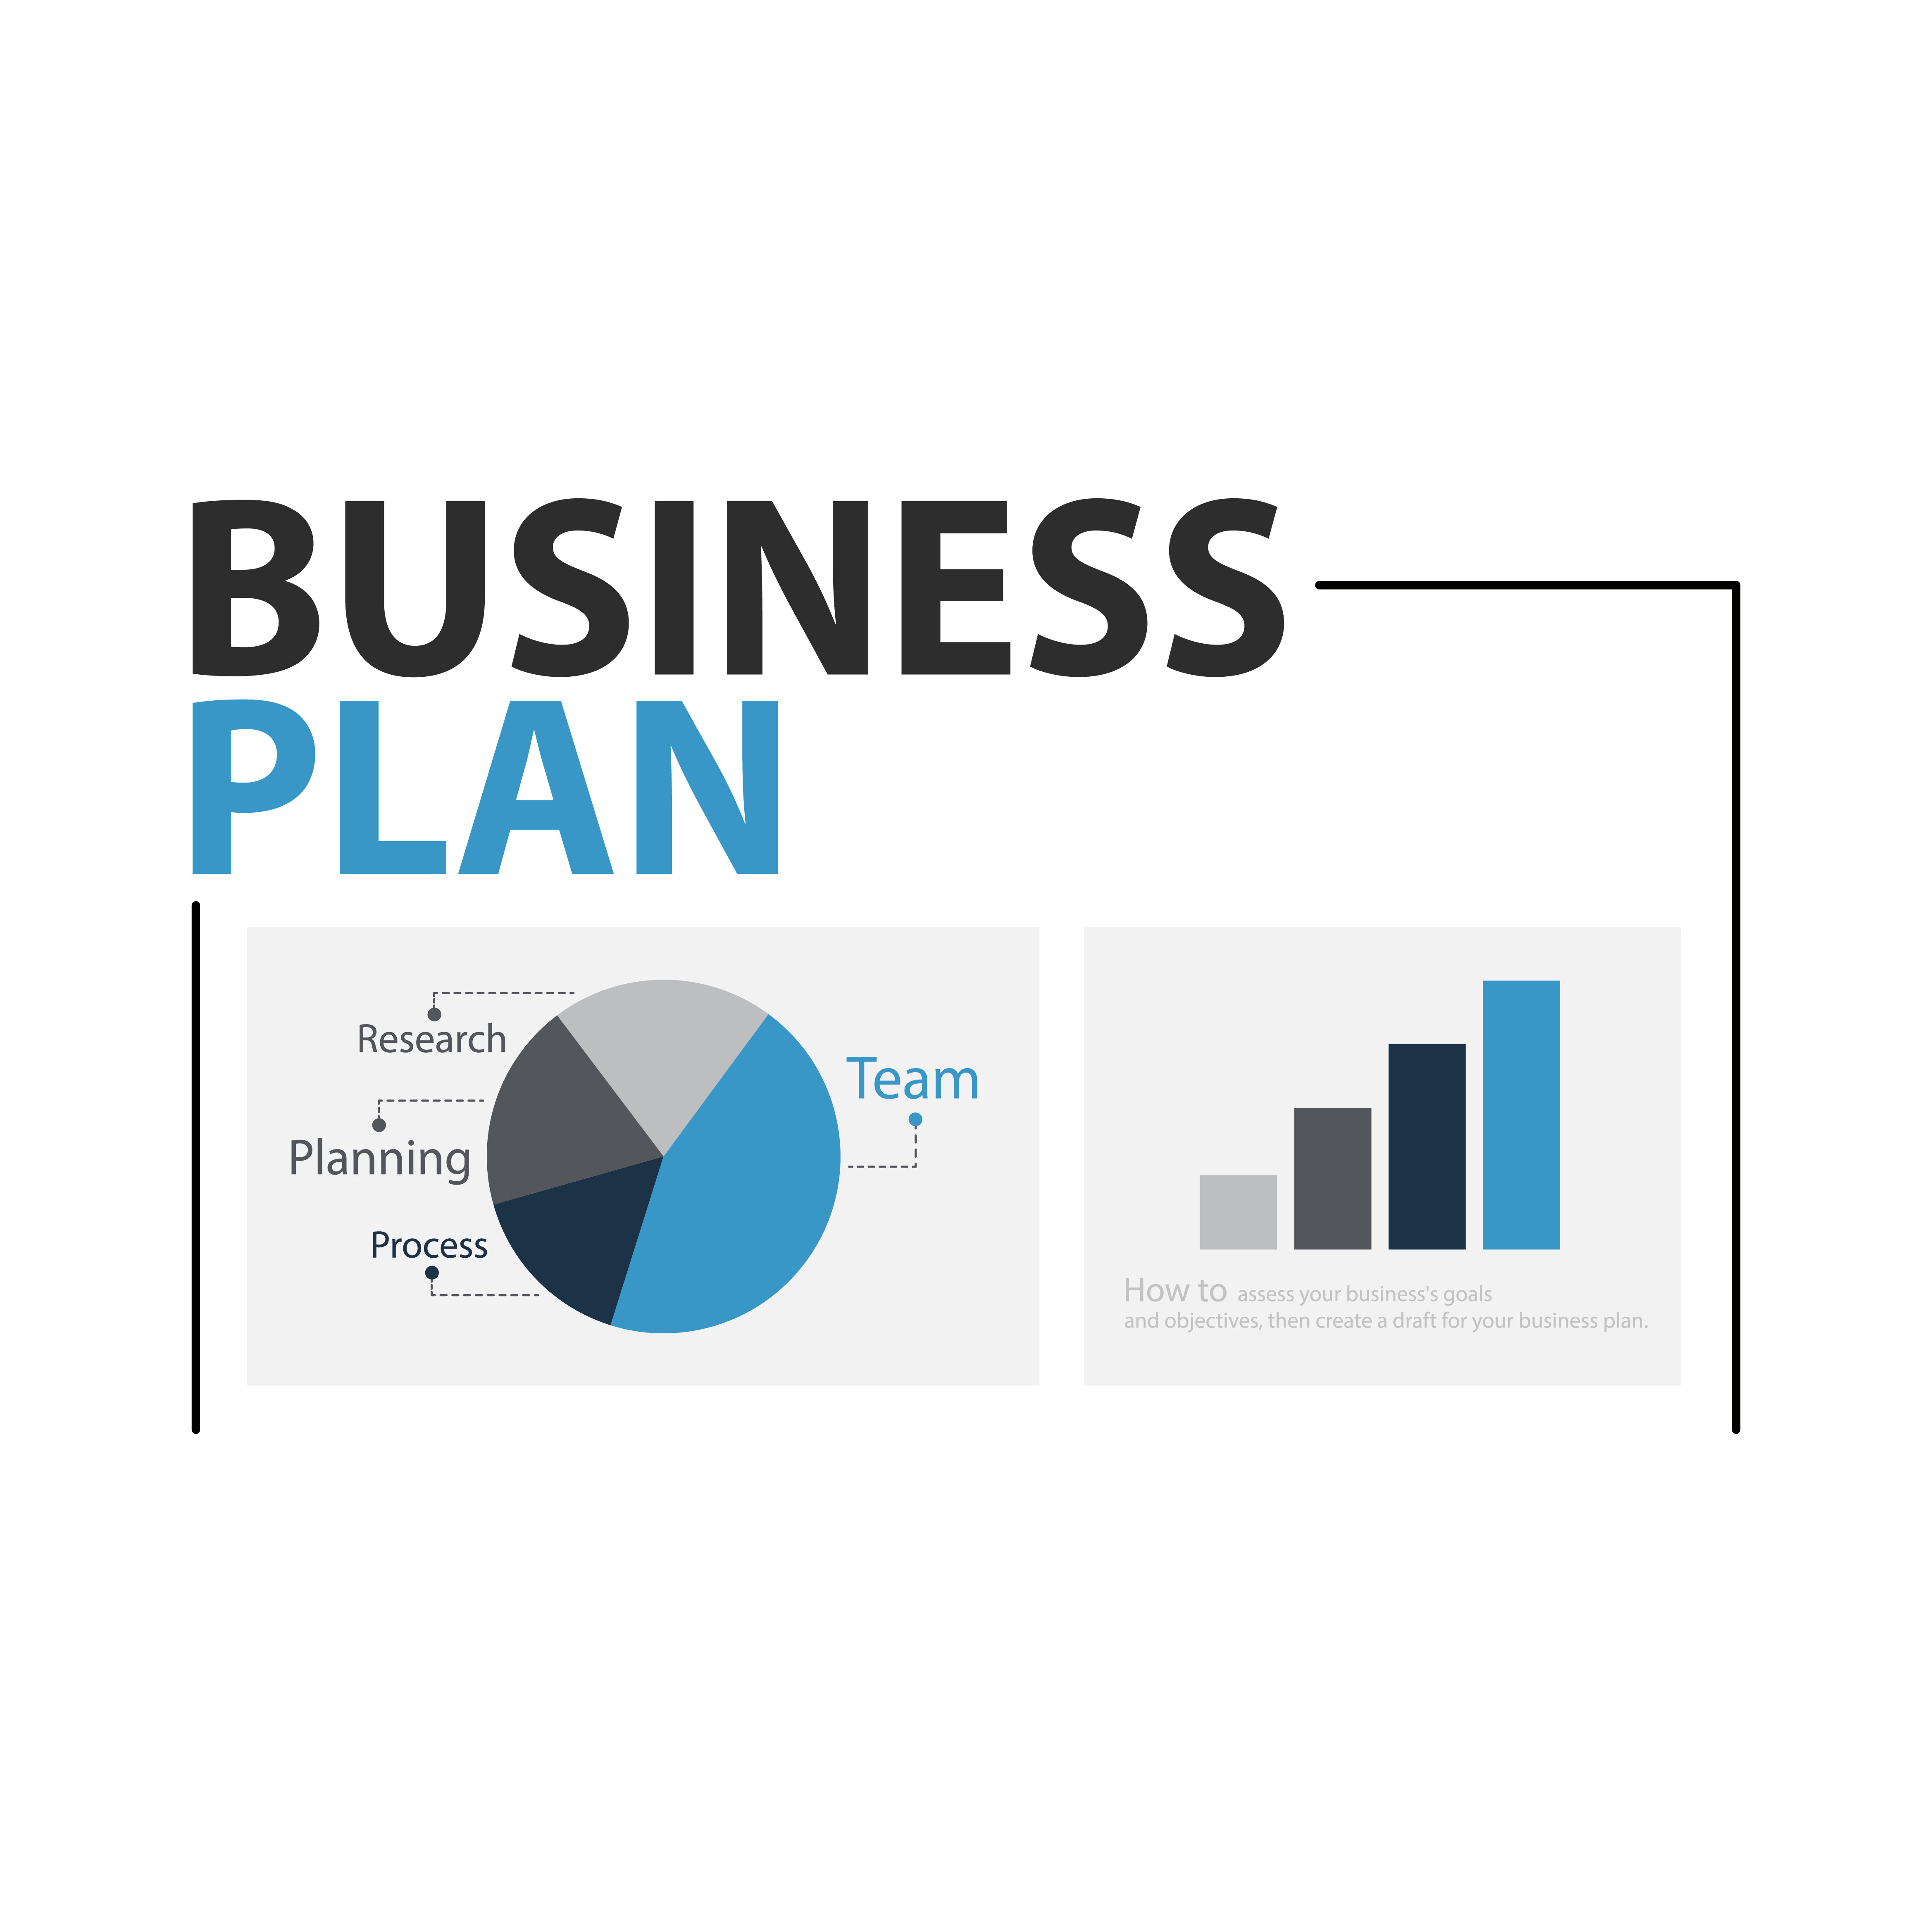 Sample Business Plan for a SaaS Startup